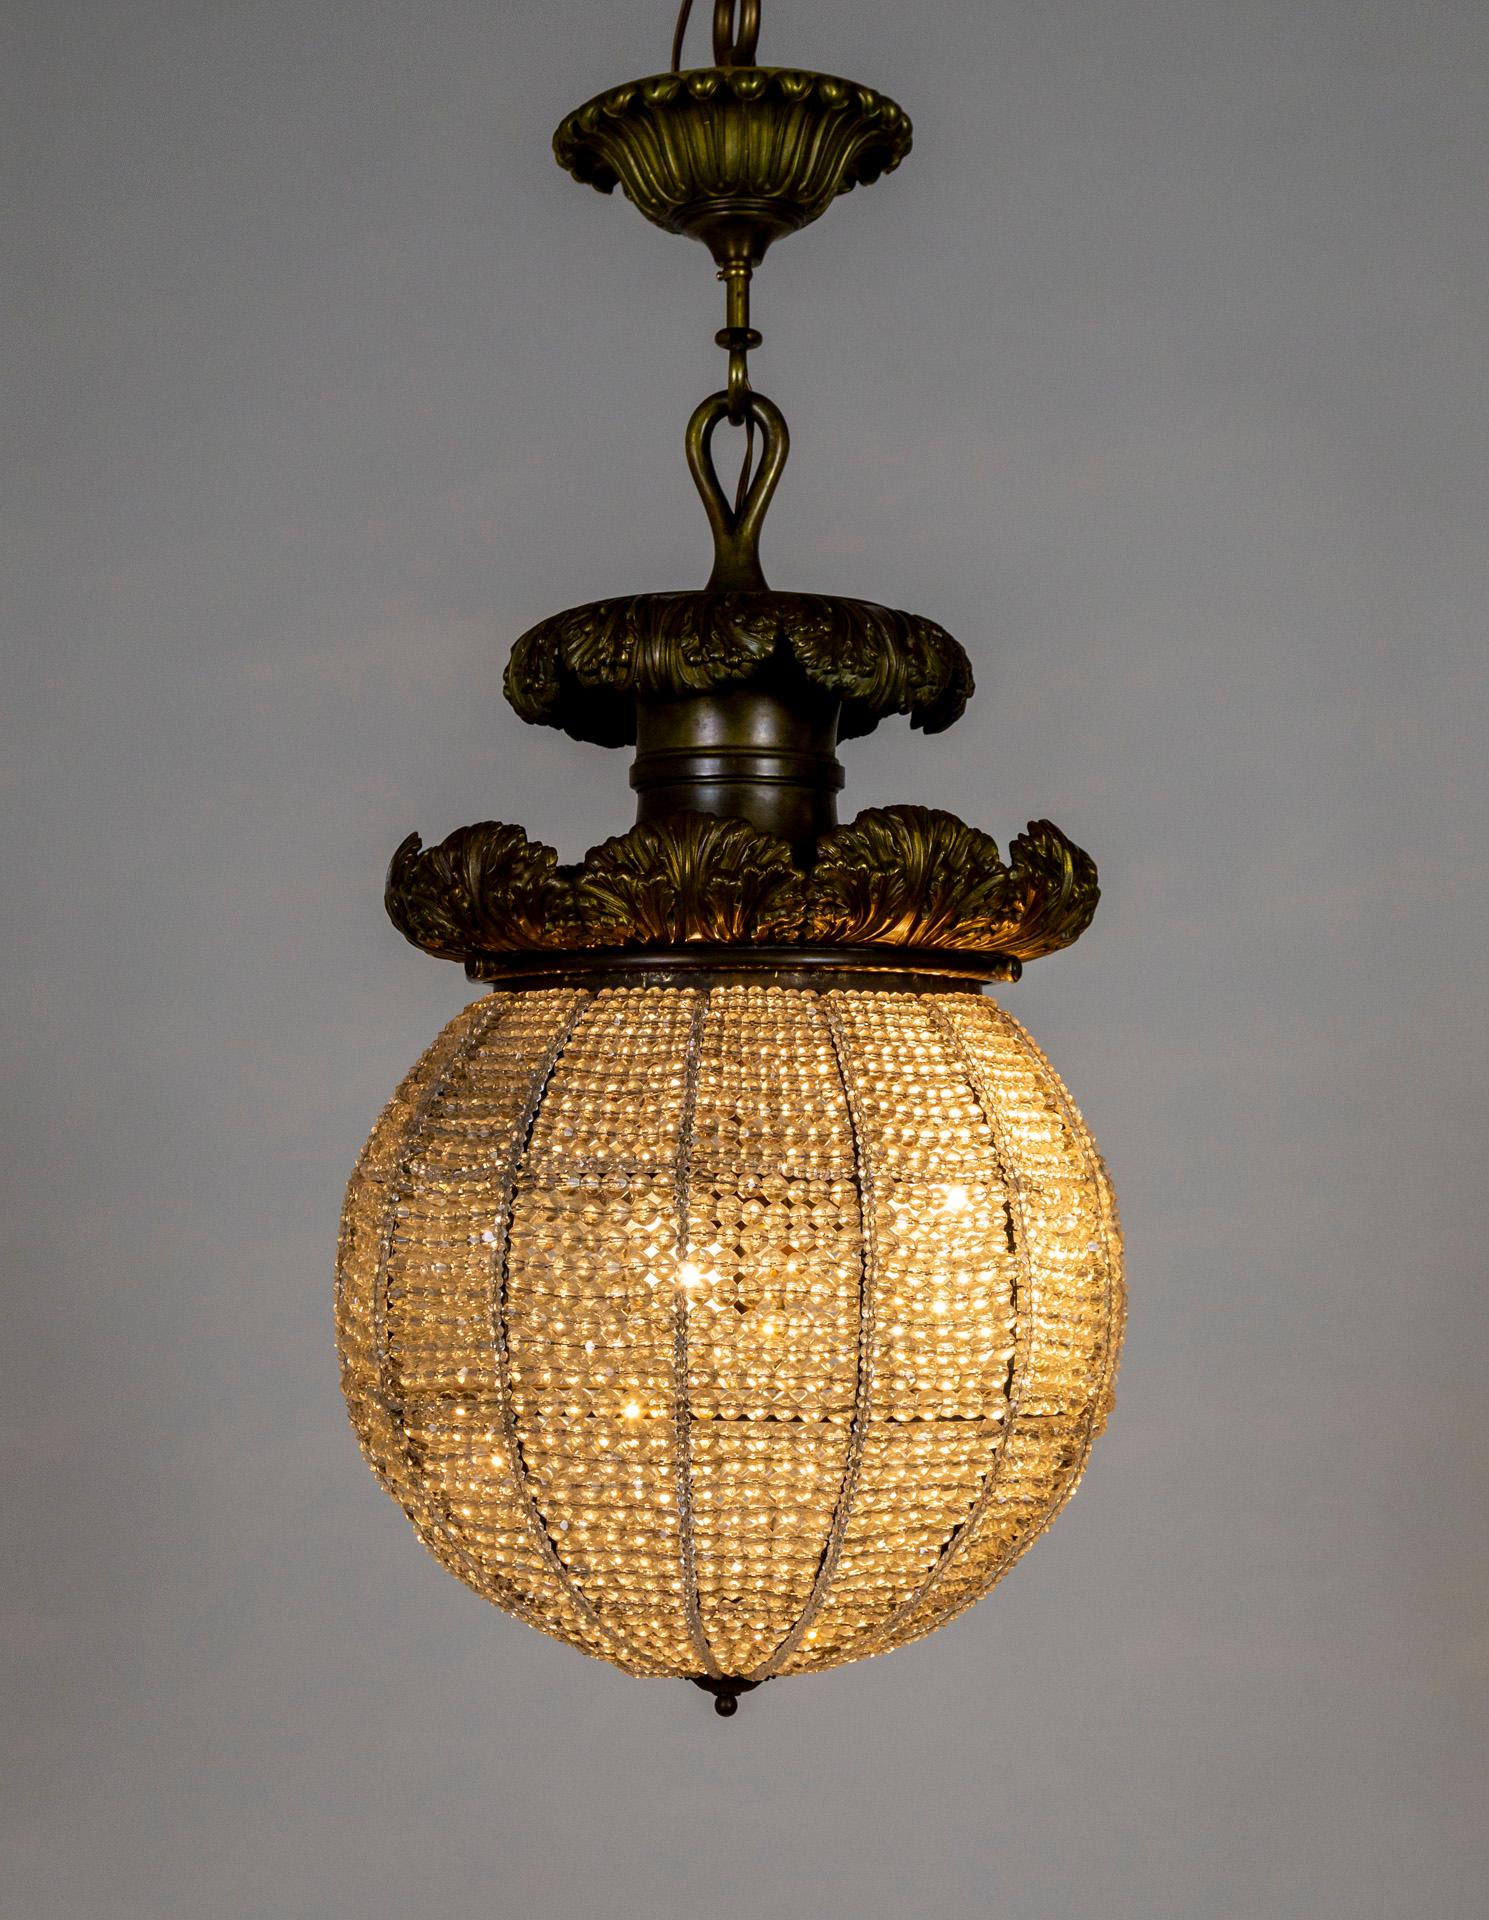 A sizable, crystal ball pendant light, topped with giant, cast bronze, curling acanthus leaves. It is composed of innumerable strands of faceted crystal beads wired onto a large, orb shaped armature that acts as a shade to a 3-socket cluster. The